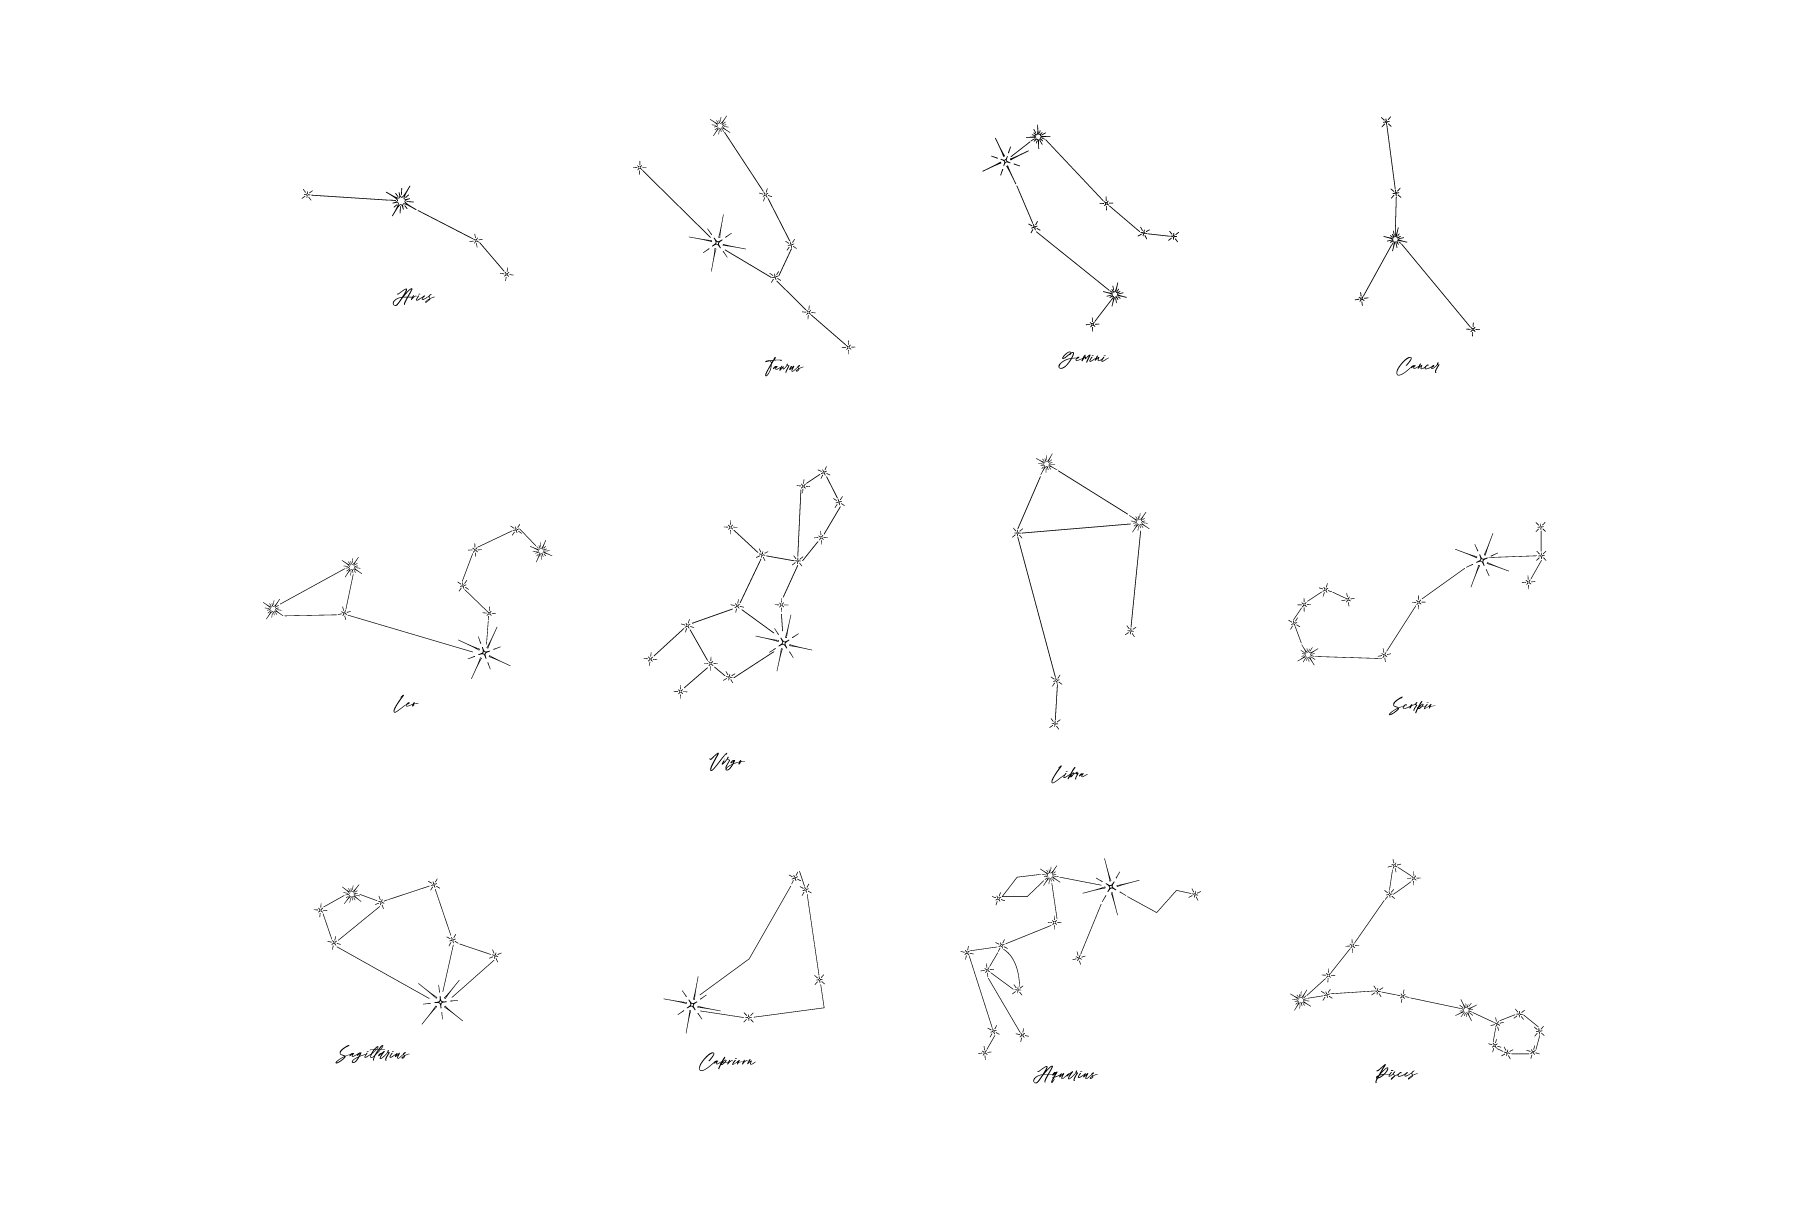 Astrological constellations set preview image.